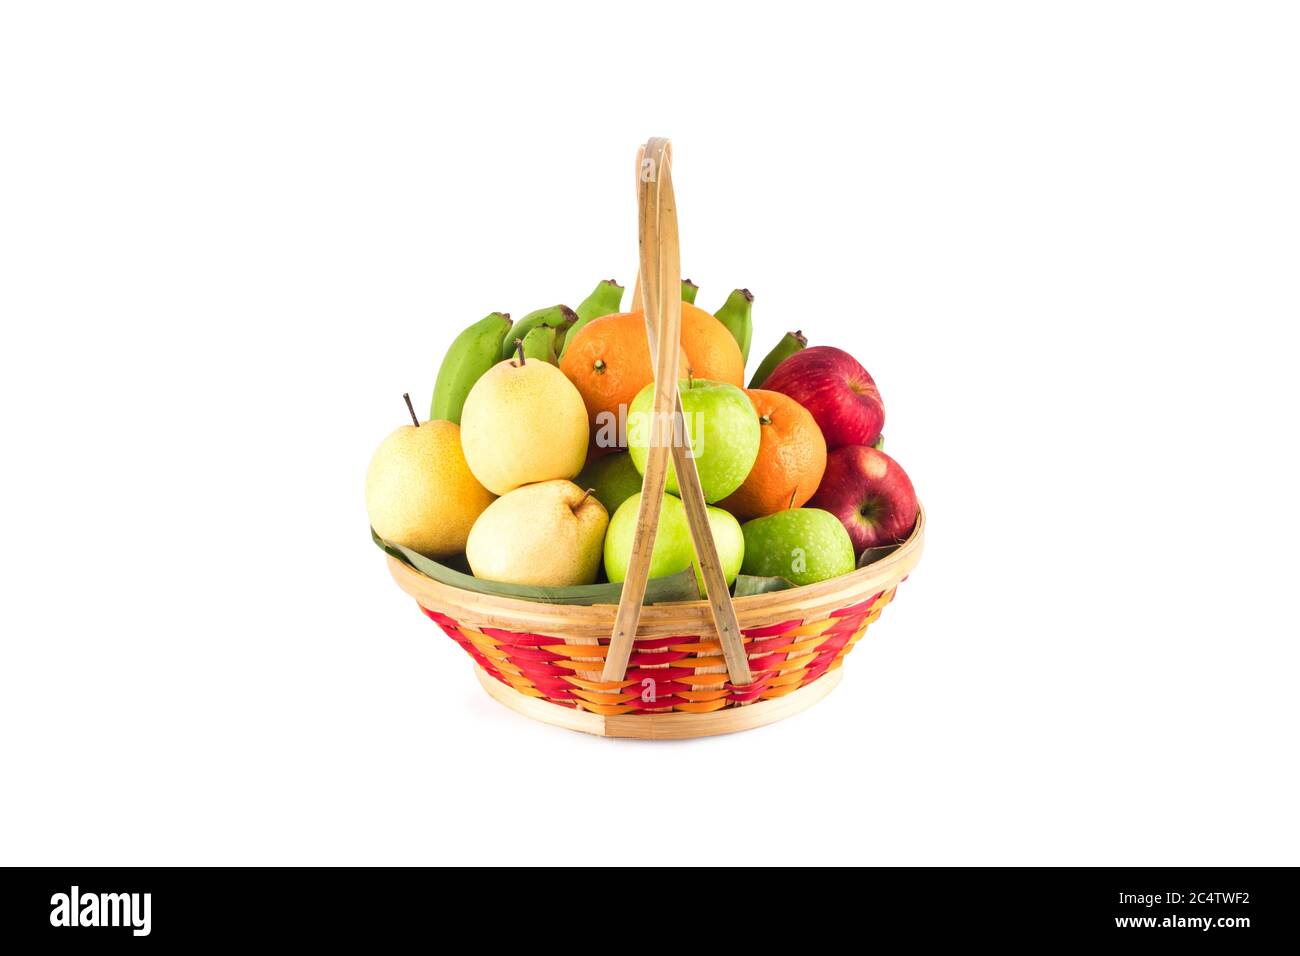 composition assorted fresh fruits such as orange, Chinese pear, banana, red apple and green applein  bamboo wicker basket on white background fruit he Stock Photo